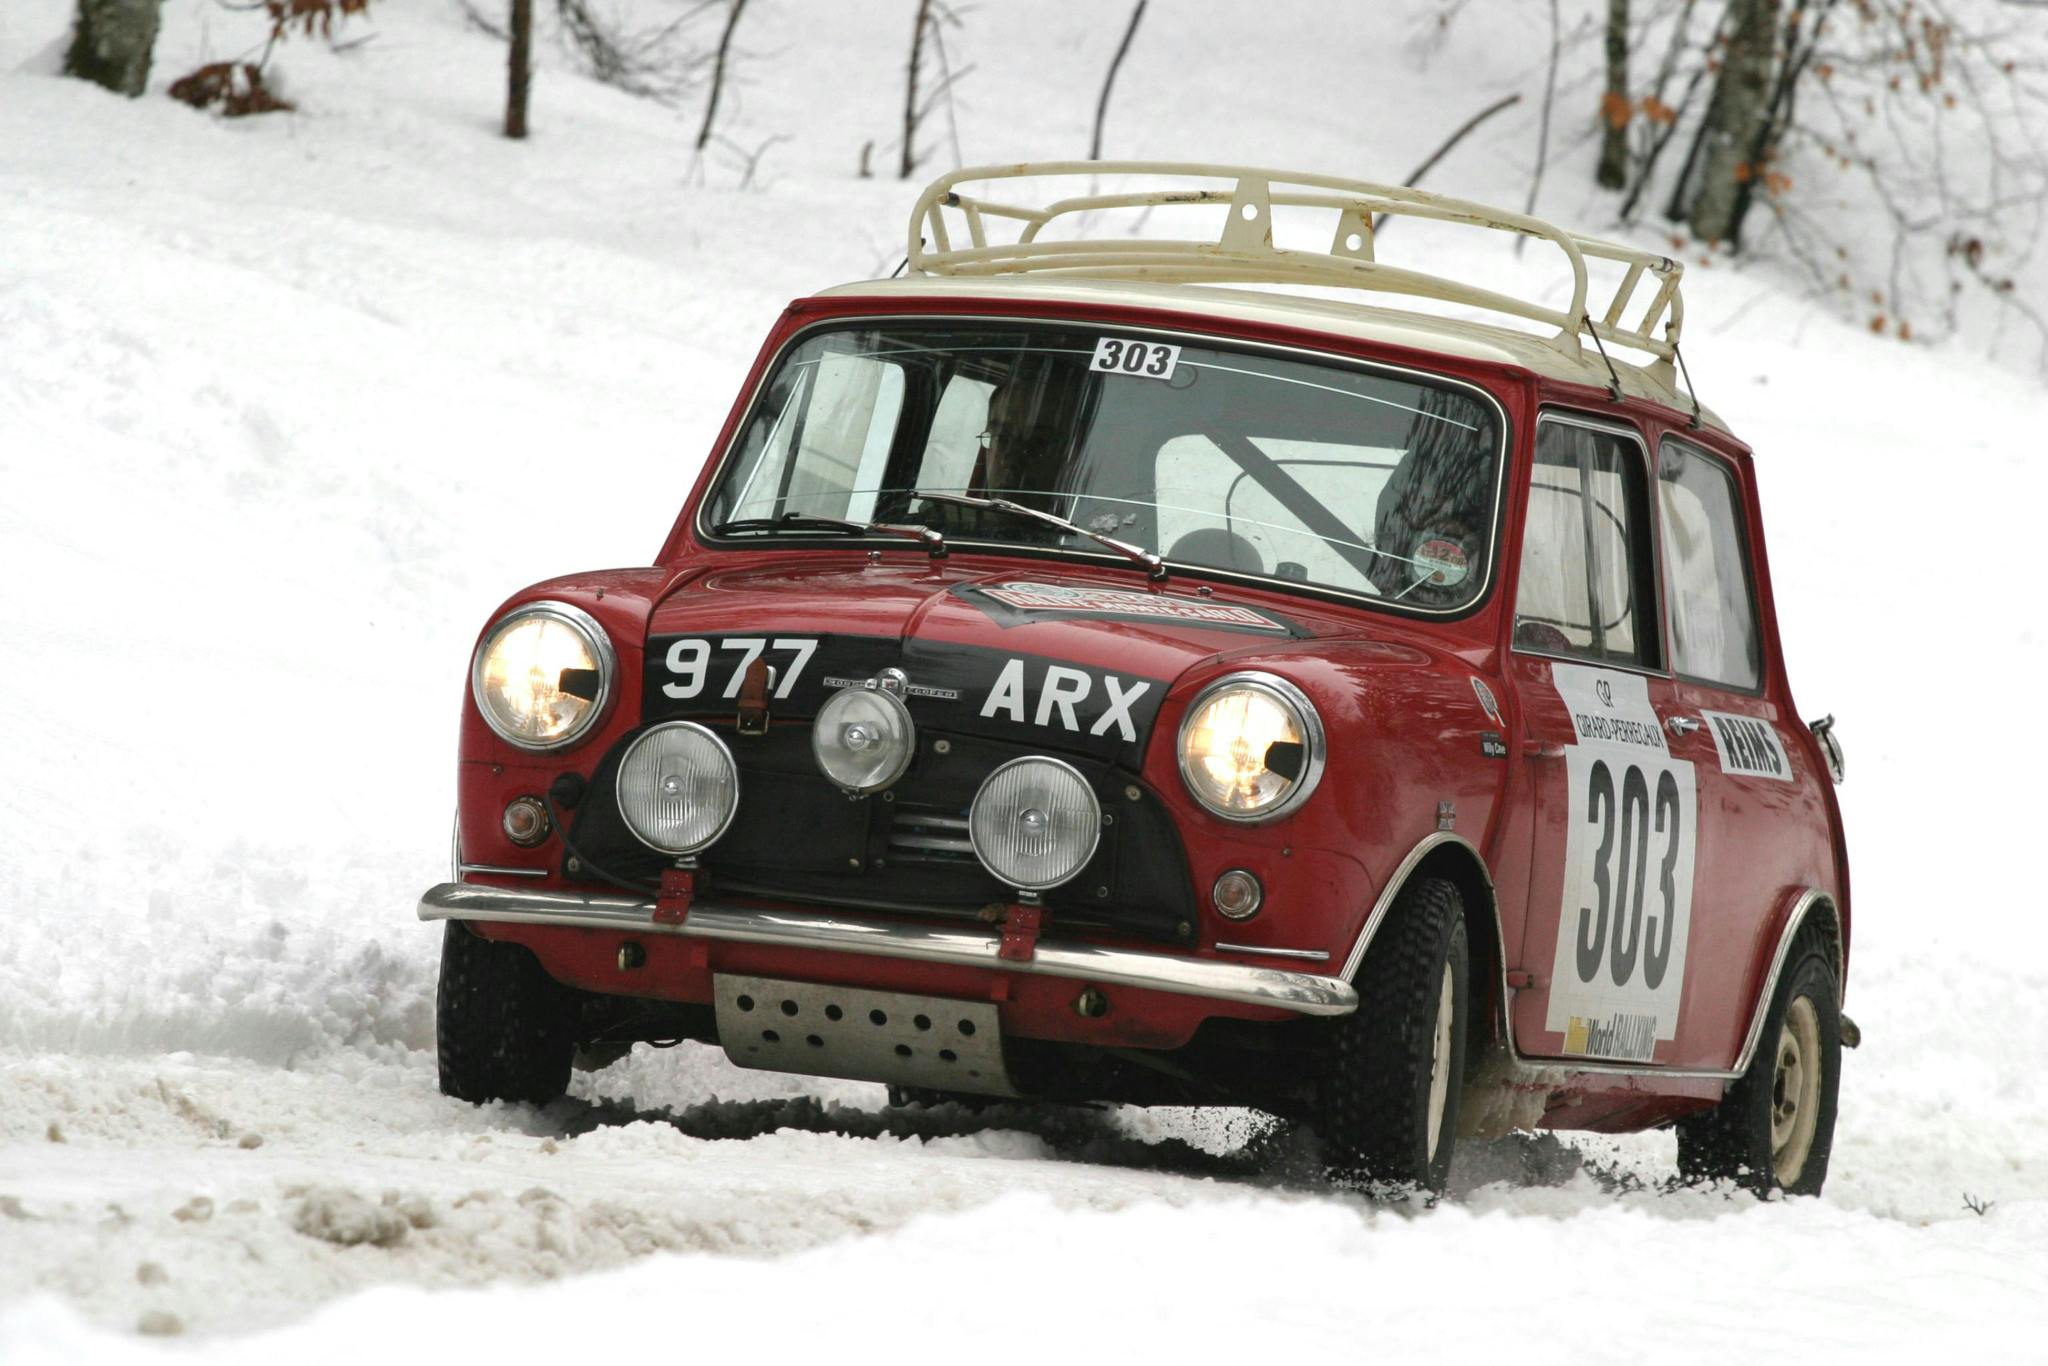 The Mini Cooper of Peter Barker and Willy Cave negotiate the ice and snow of the Rallye Monte Carlo Historique in 2008